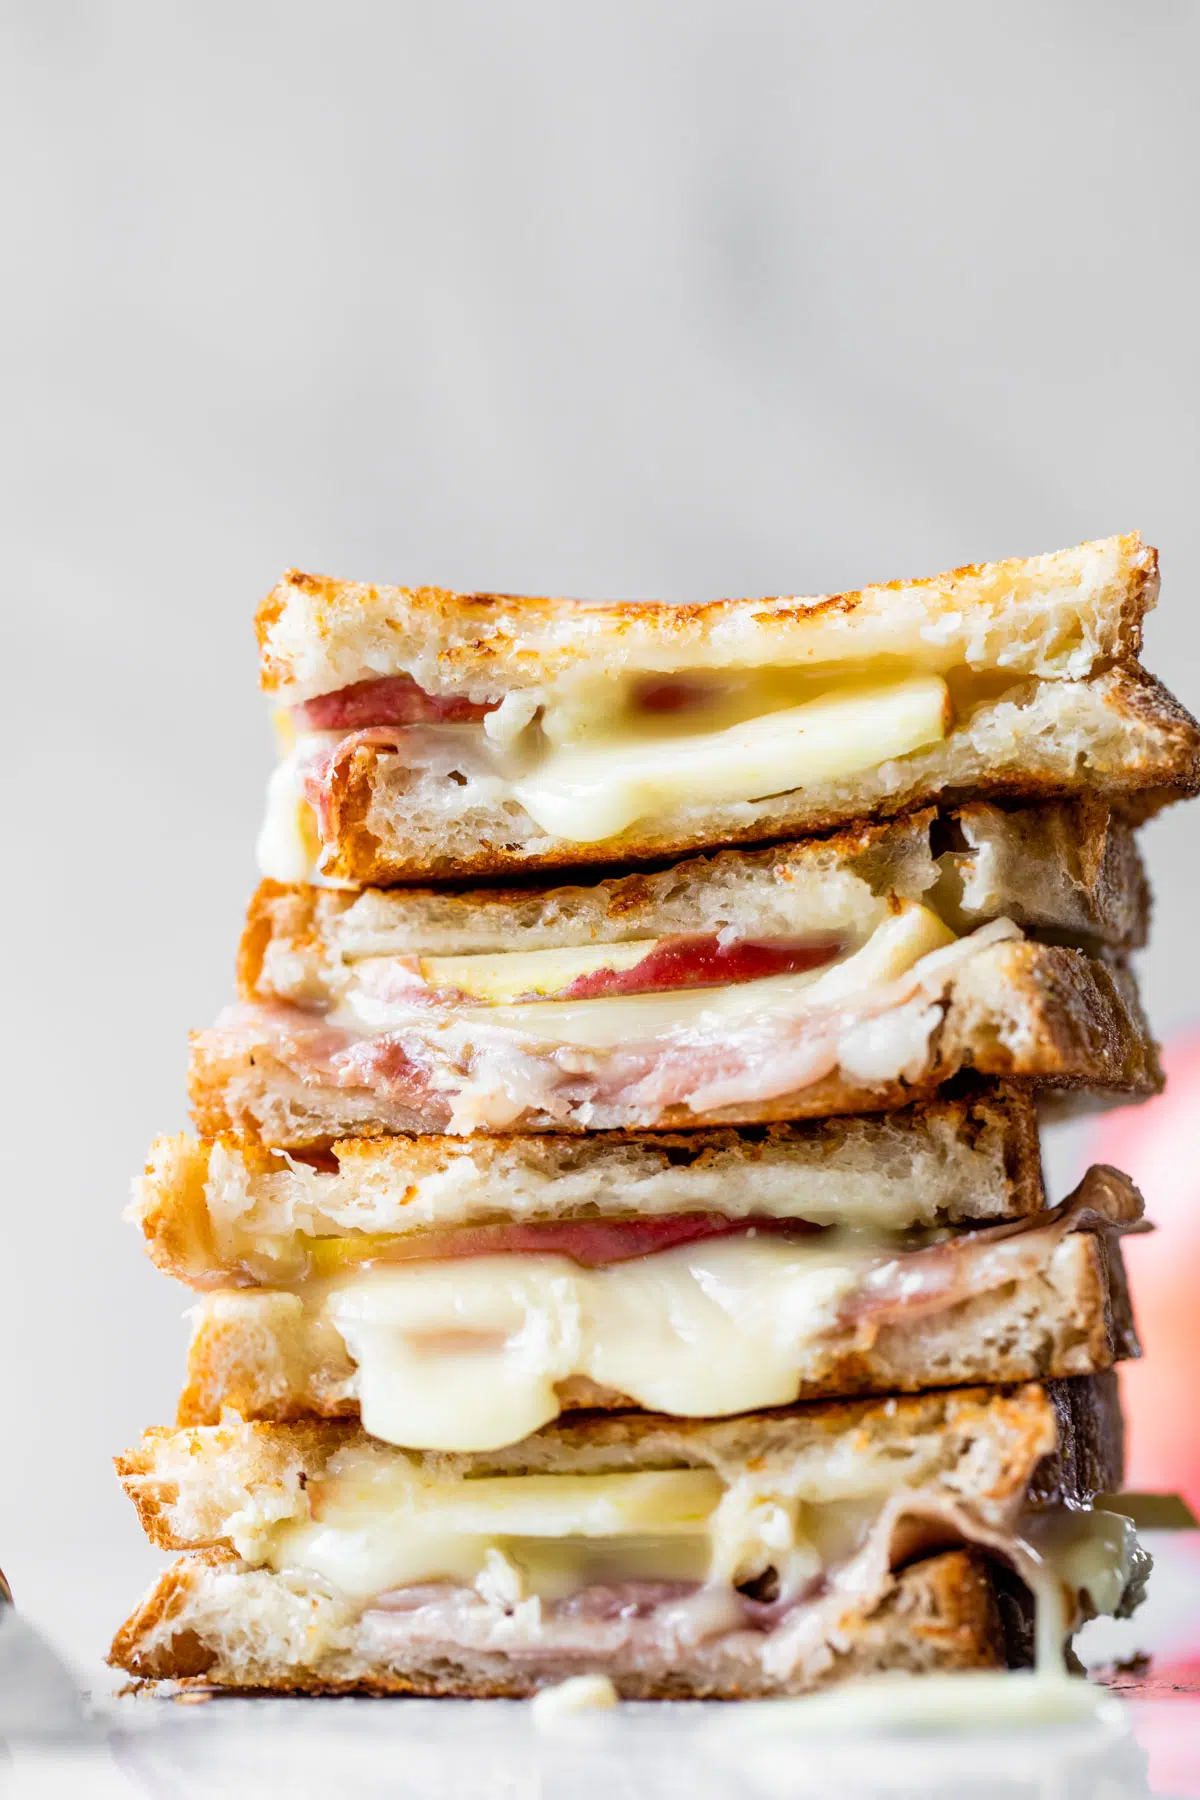 sandwich filled with cheese, prosciutto and apple slices